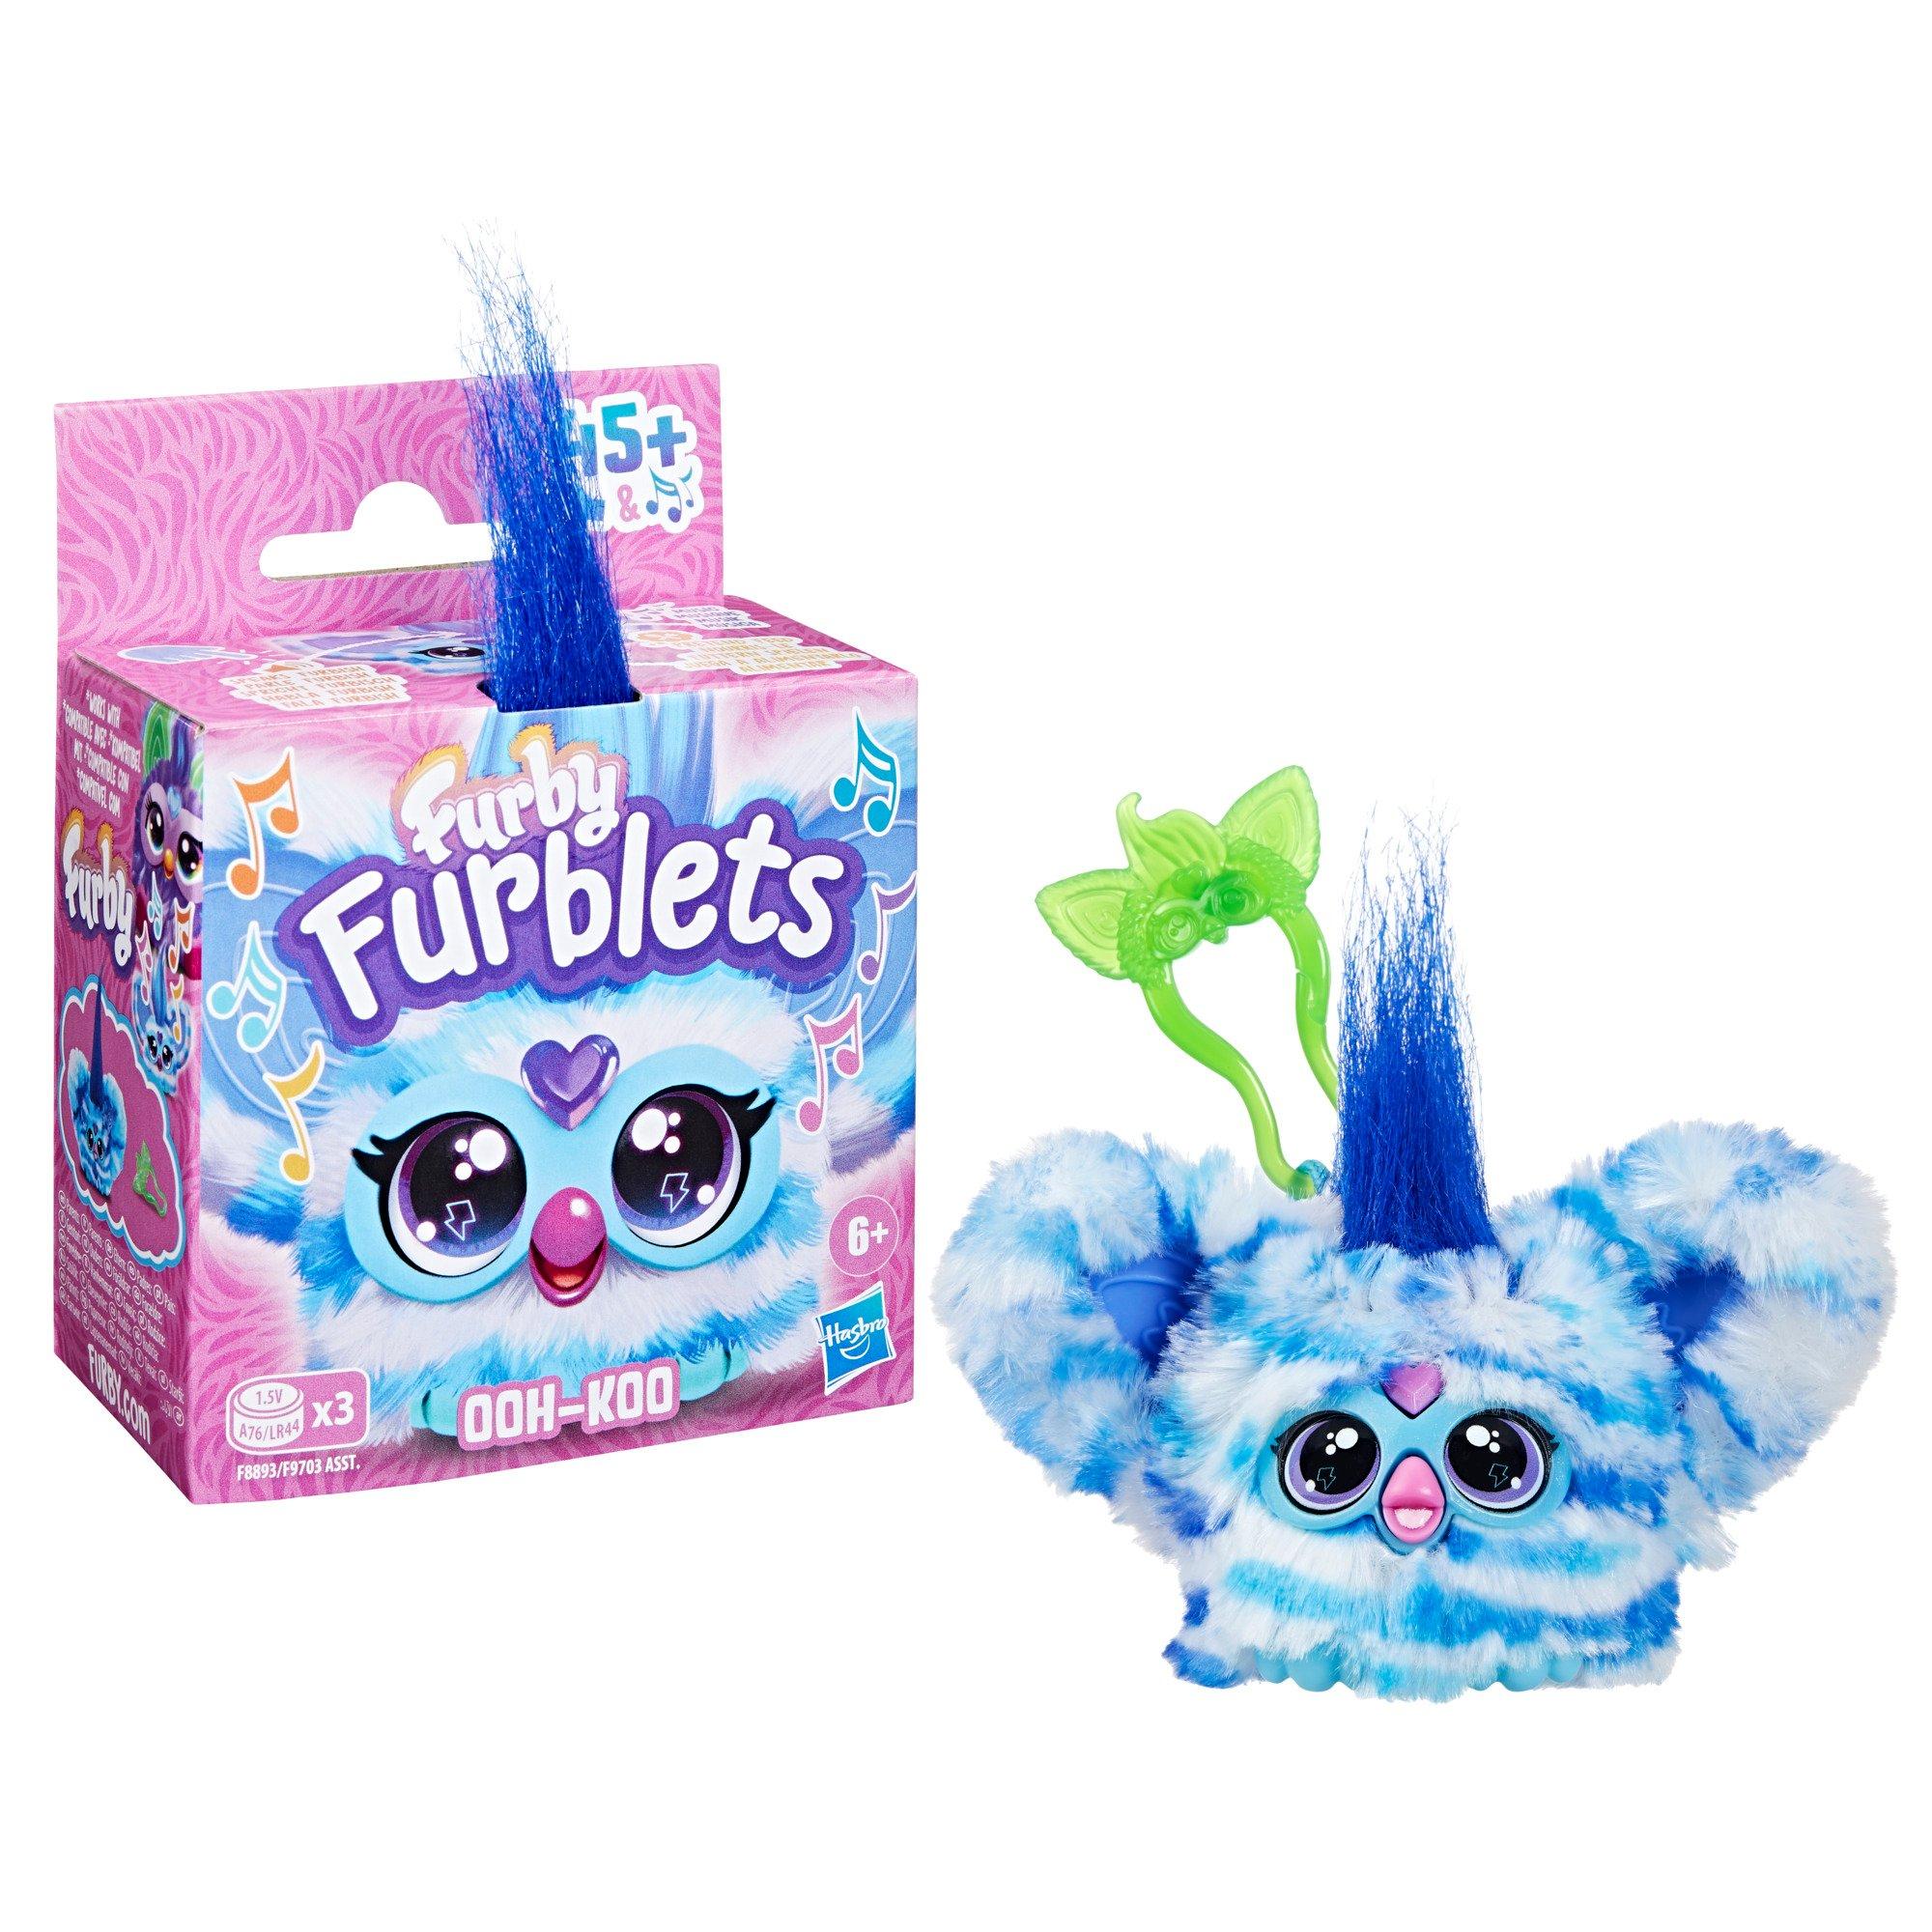 Furblets Are Full of Compact Furby Fun - The Toy Insider